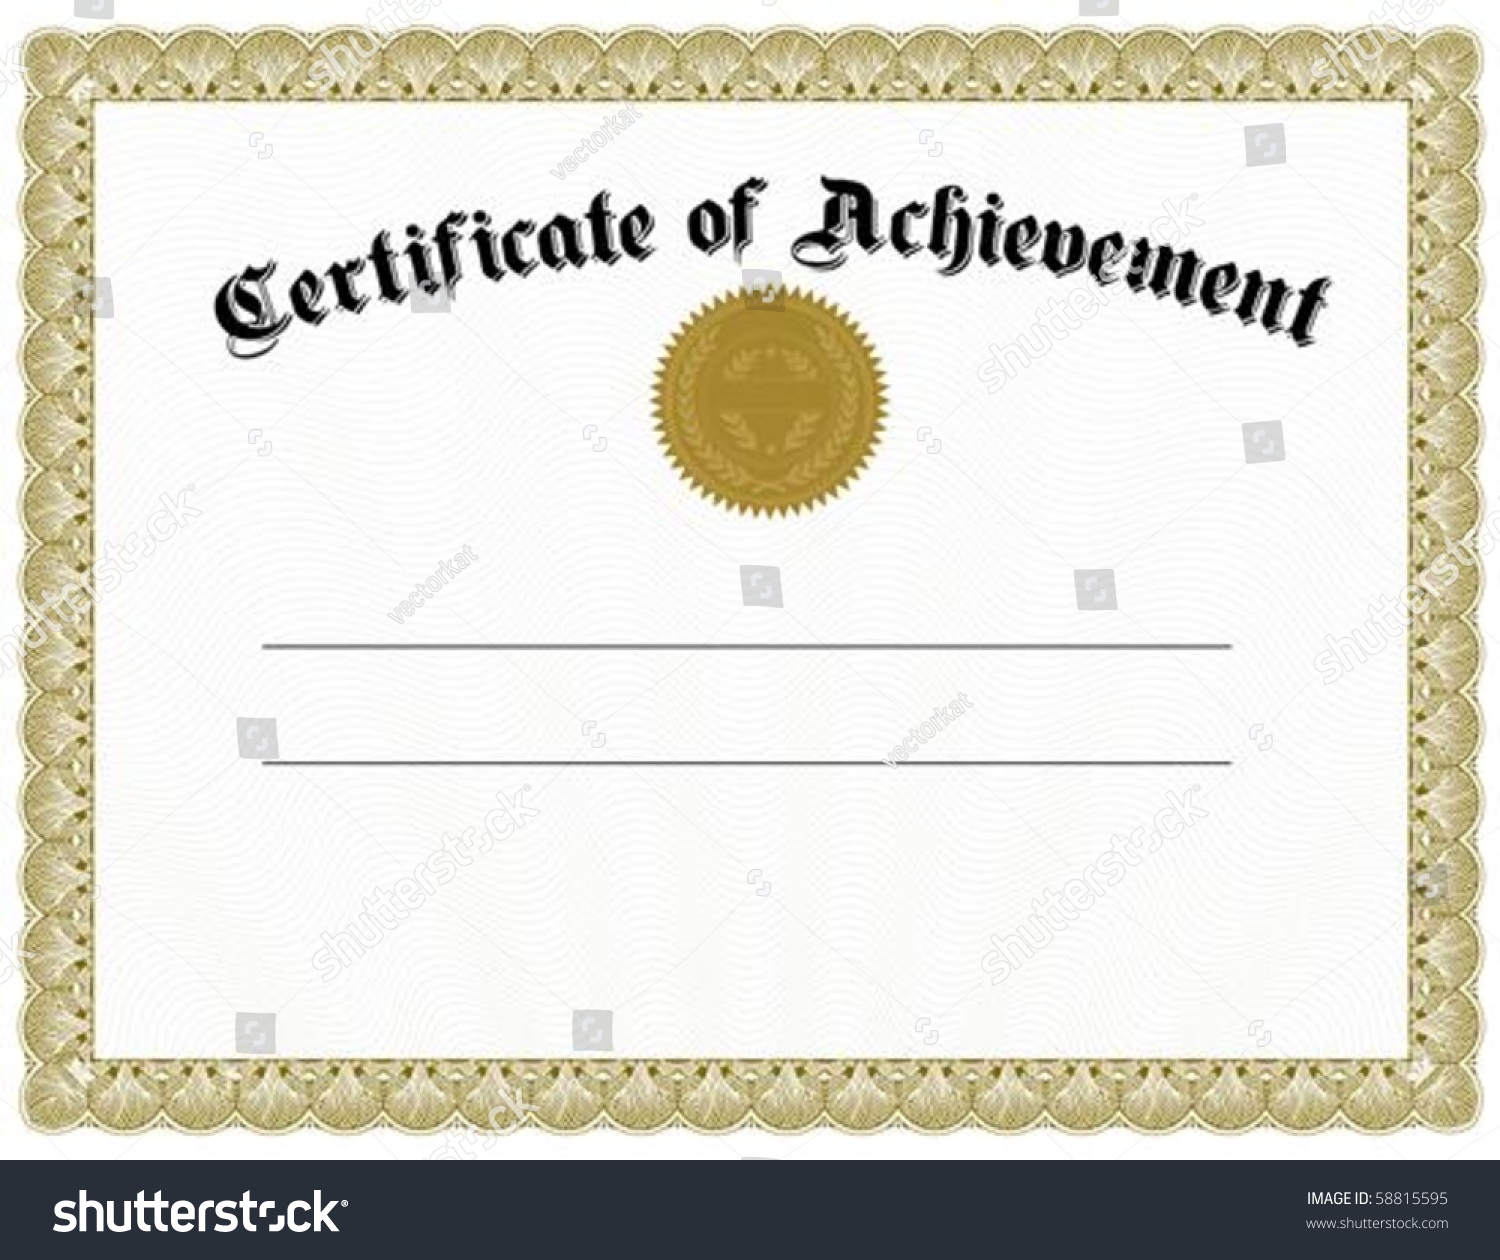 Certificate Template Edit Vector Certificate Template And Gold Seal. Easy To Edit And Scale. - 58815595 : Shutterstock